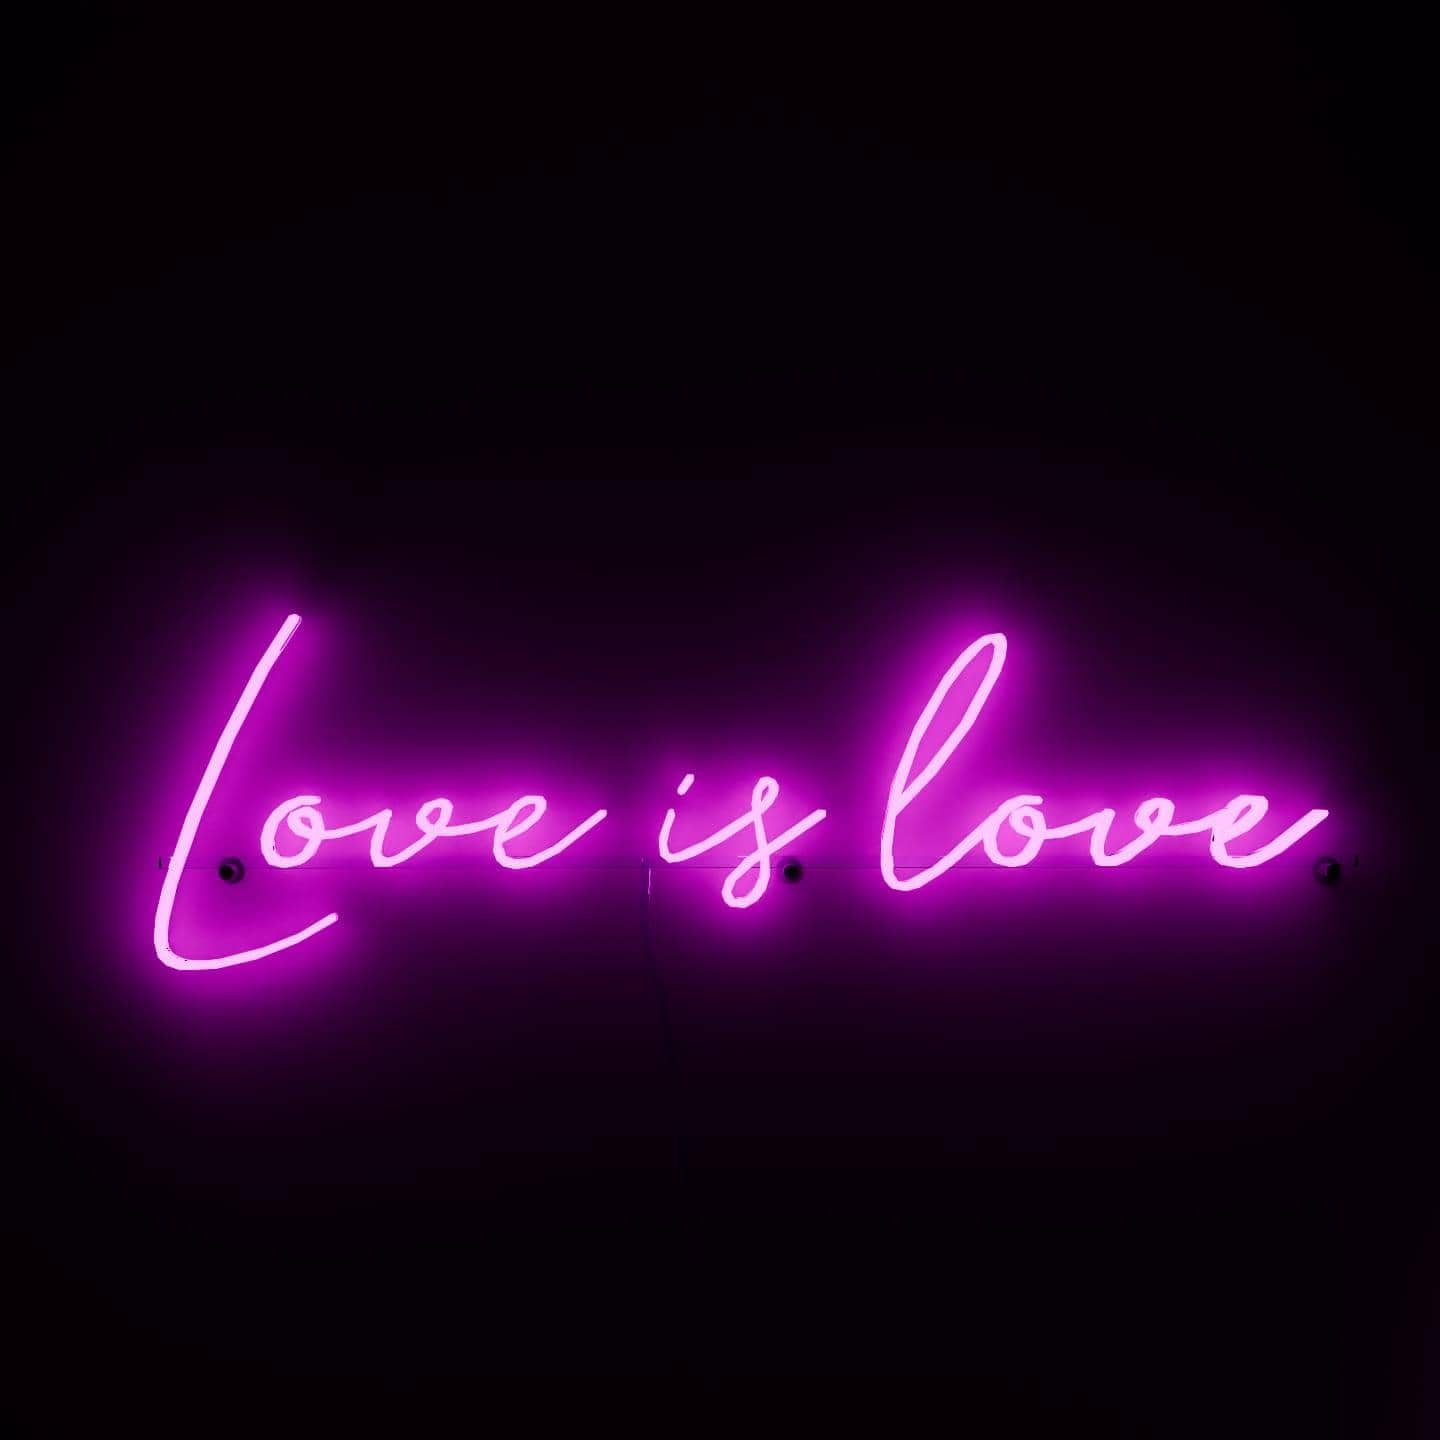 dark-night-shot-with-pink-neon-lights-hanging-on-the-wall-for-display-love-is-love